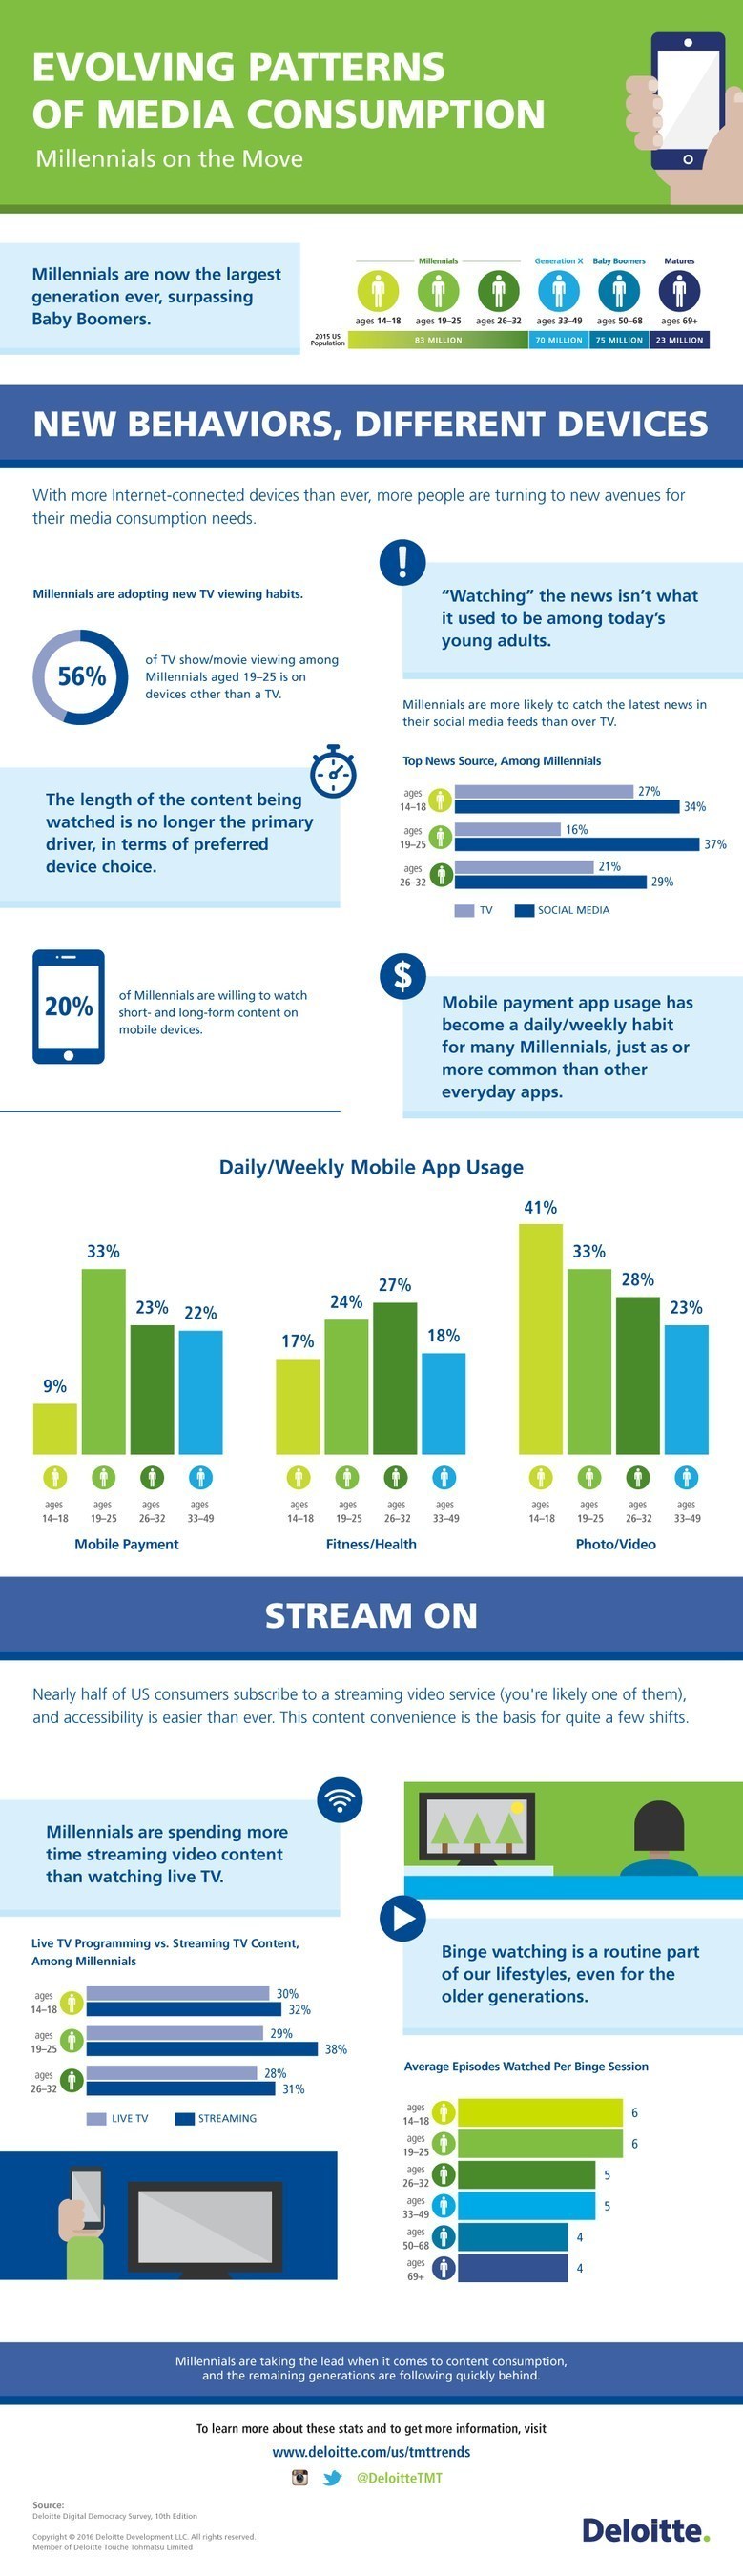 EVOLVING PATTERNS OF MEDIA CONSUMPTION Infographic